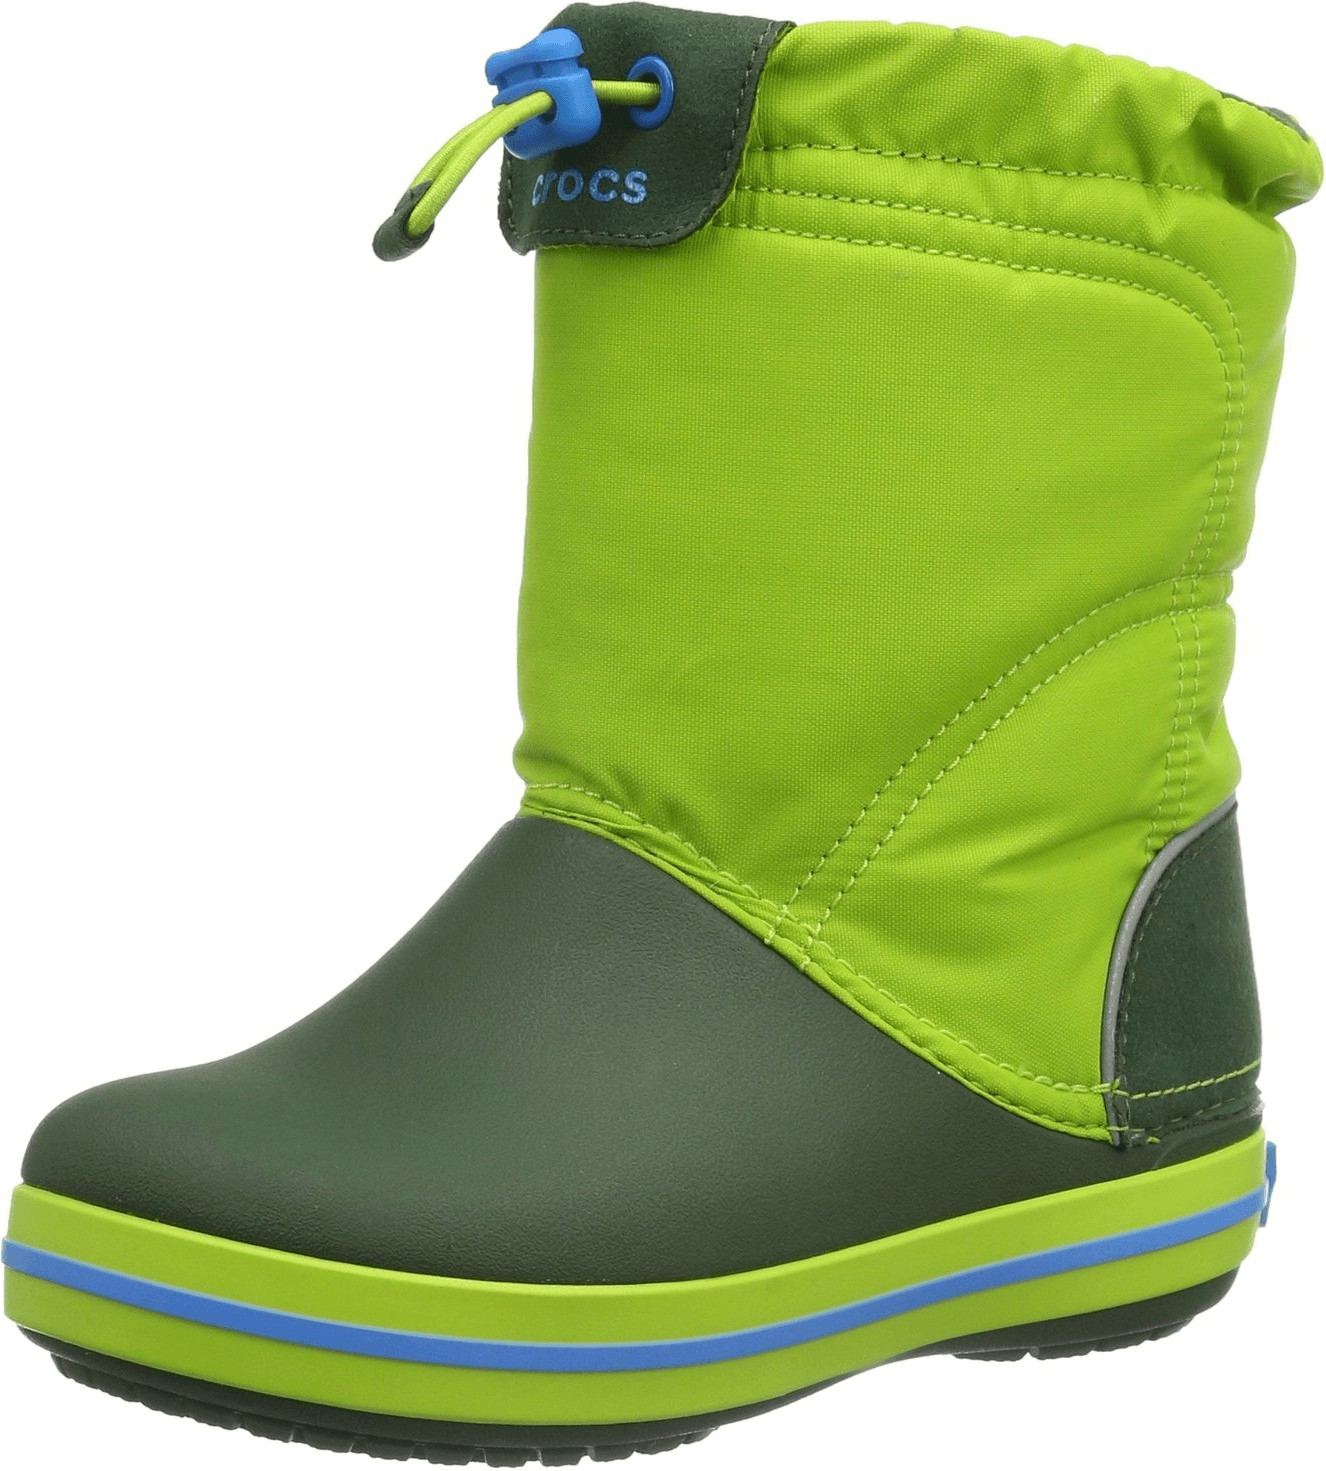 Crocs Kids Crocband LodgePoint Boot lime/forest green